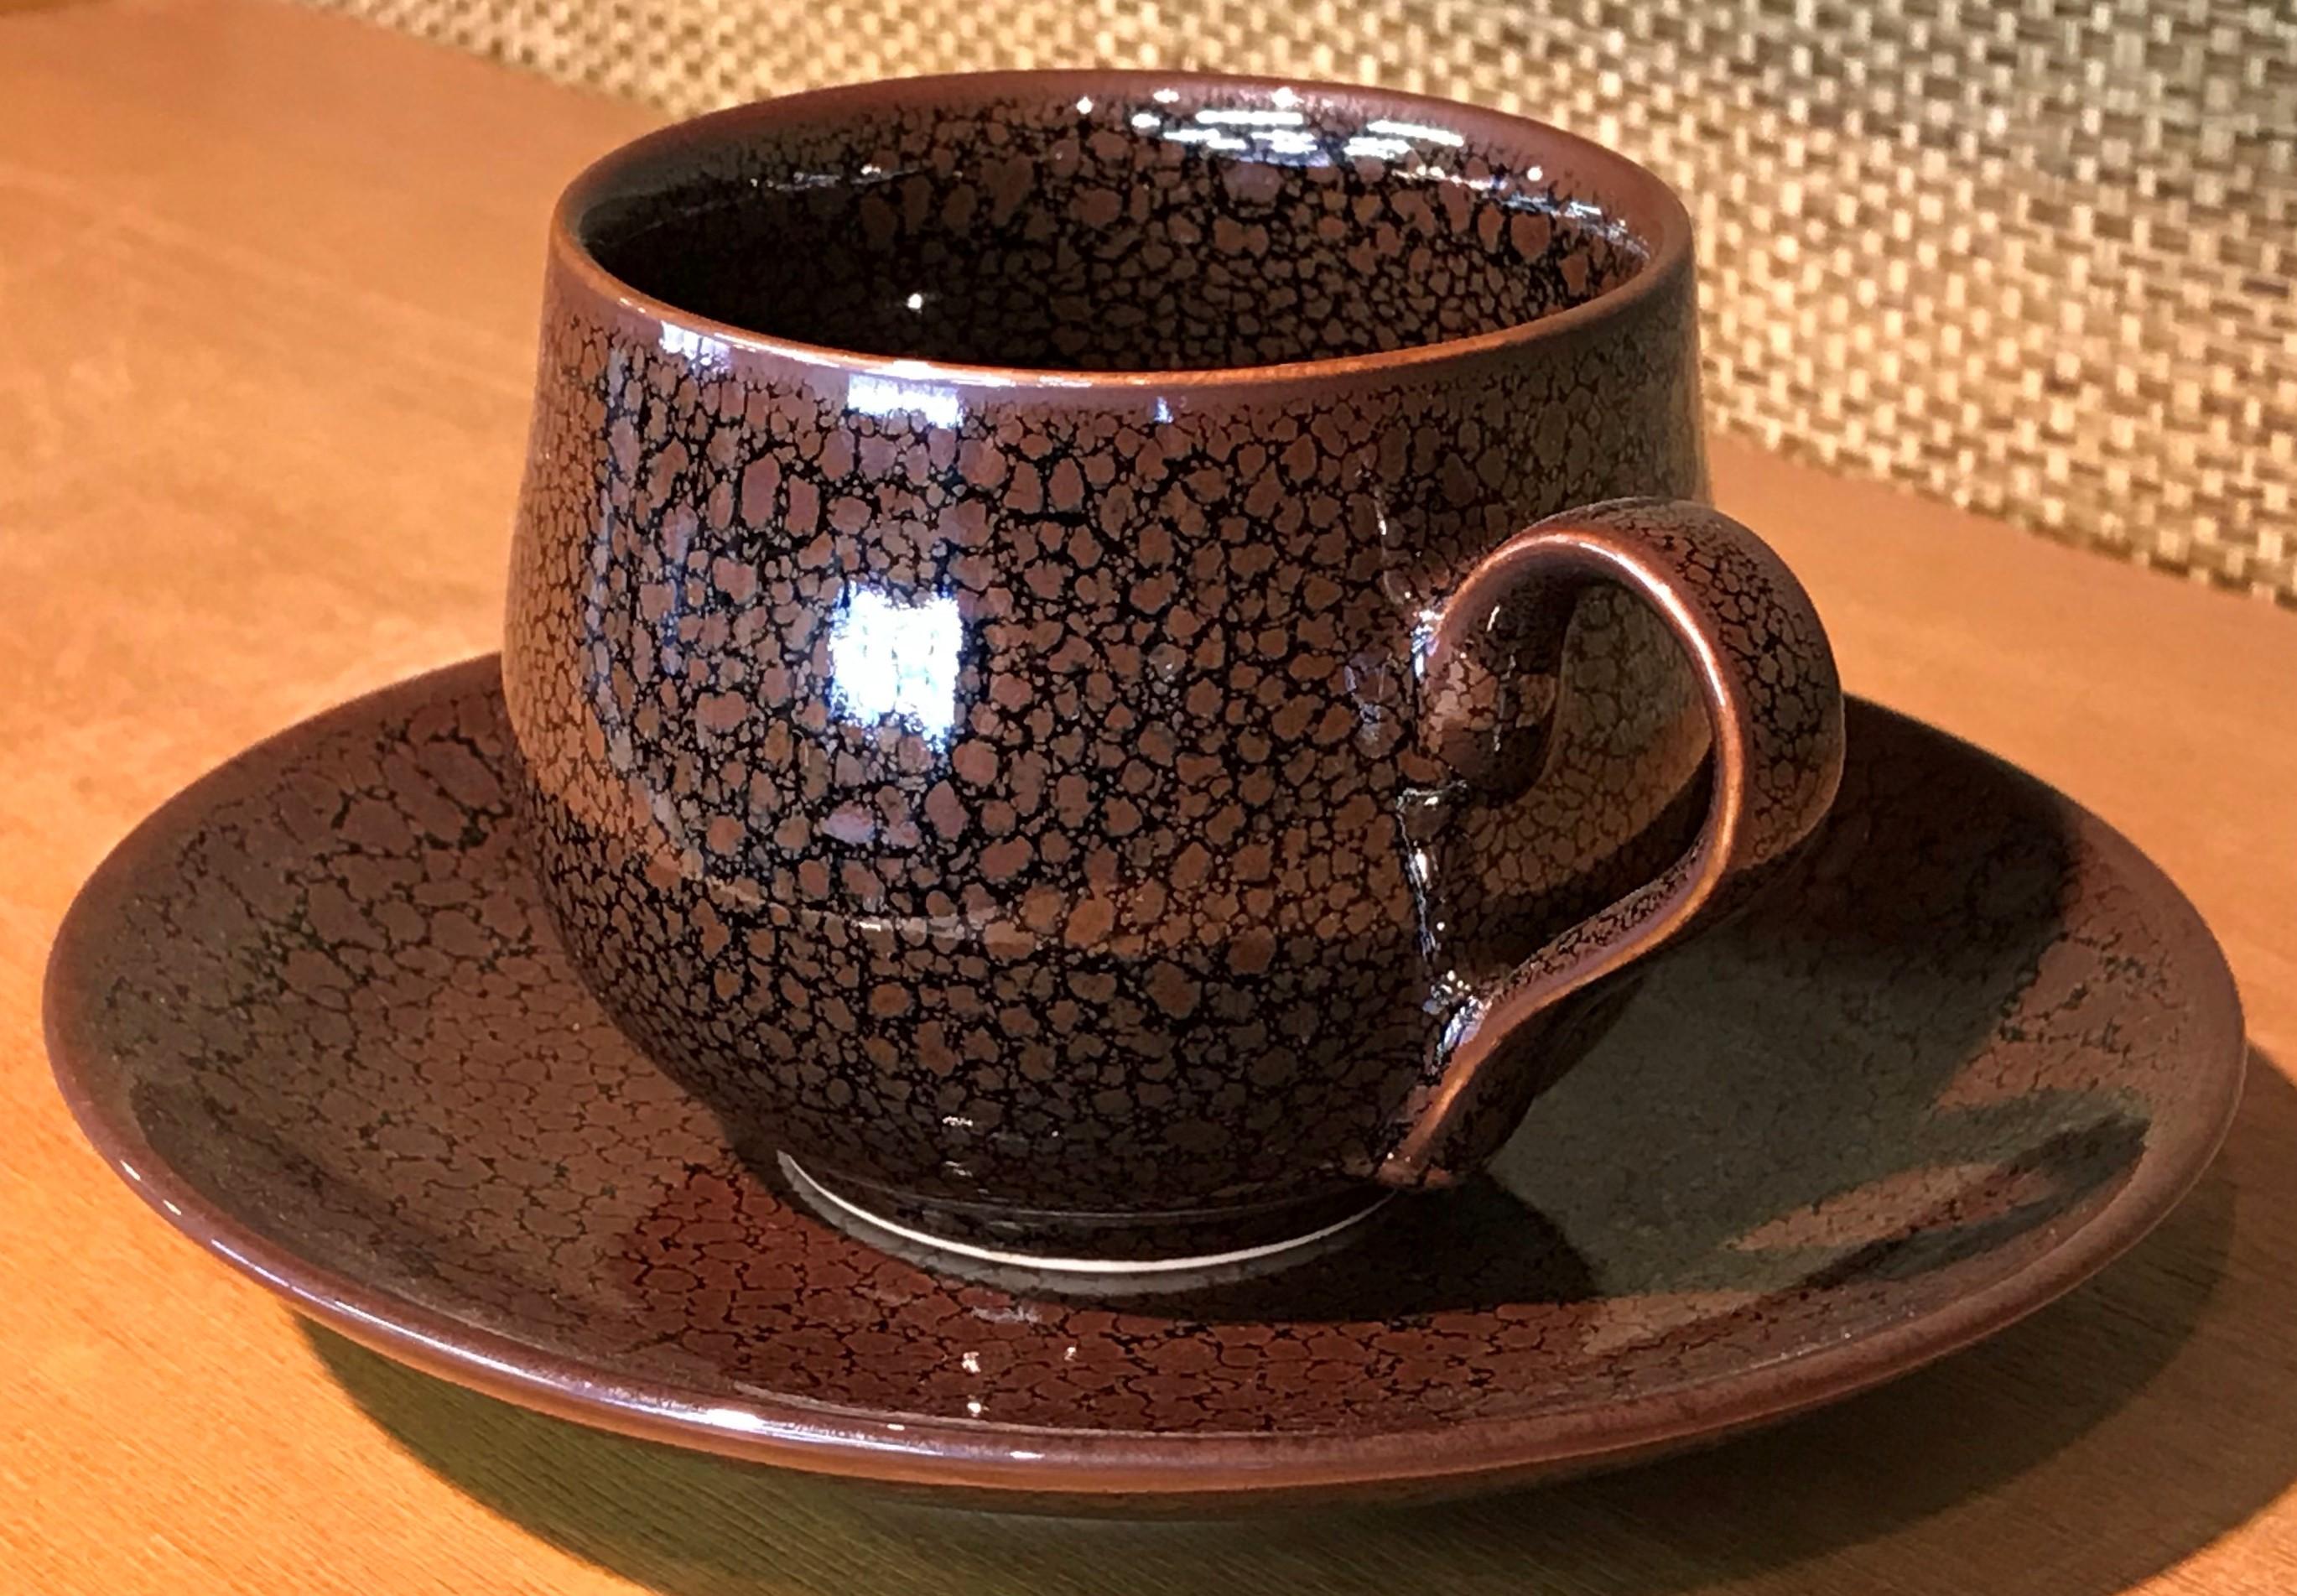 Unique contemporary Japanese porcelain cup and saucer, hand-glazed in stunning signature brown, a signed work by highly acclaimed award-winning master porcelain artist from the Imari-Arita region of Japan. 

In this extraordinary piece, the artist